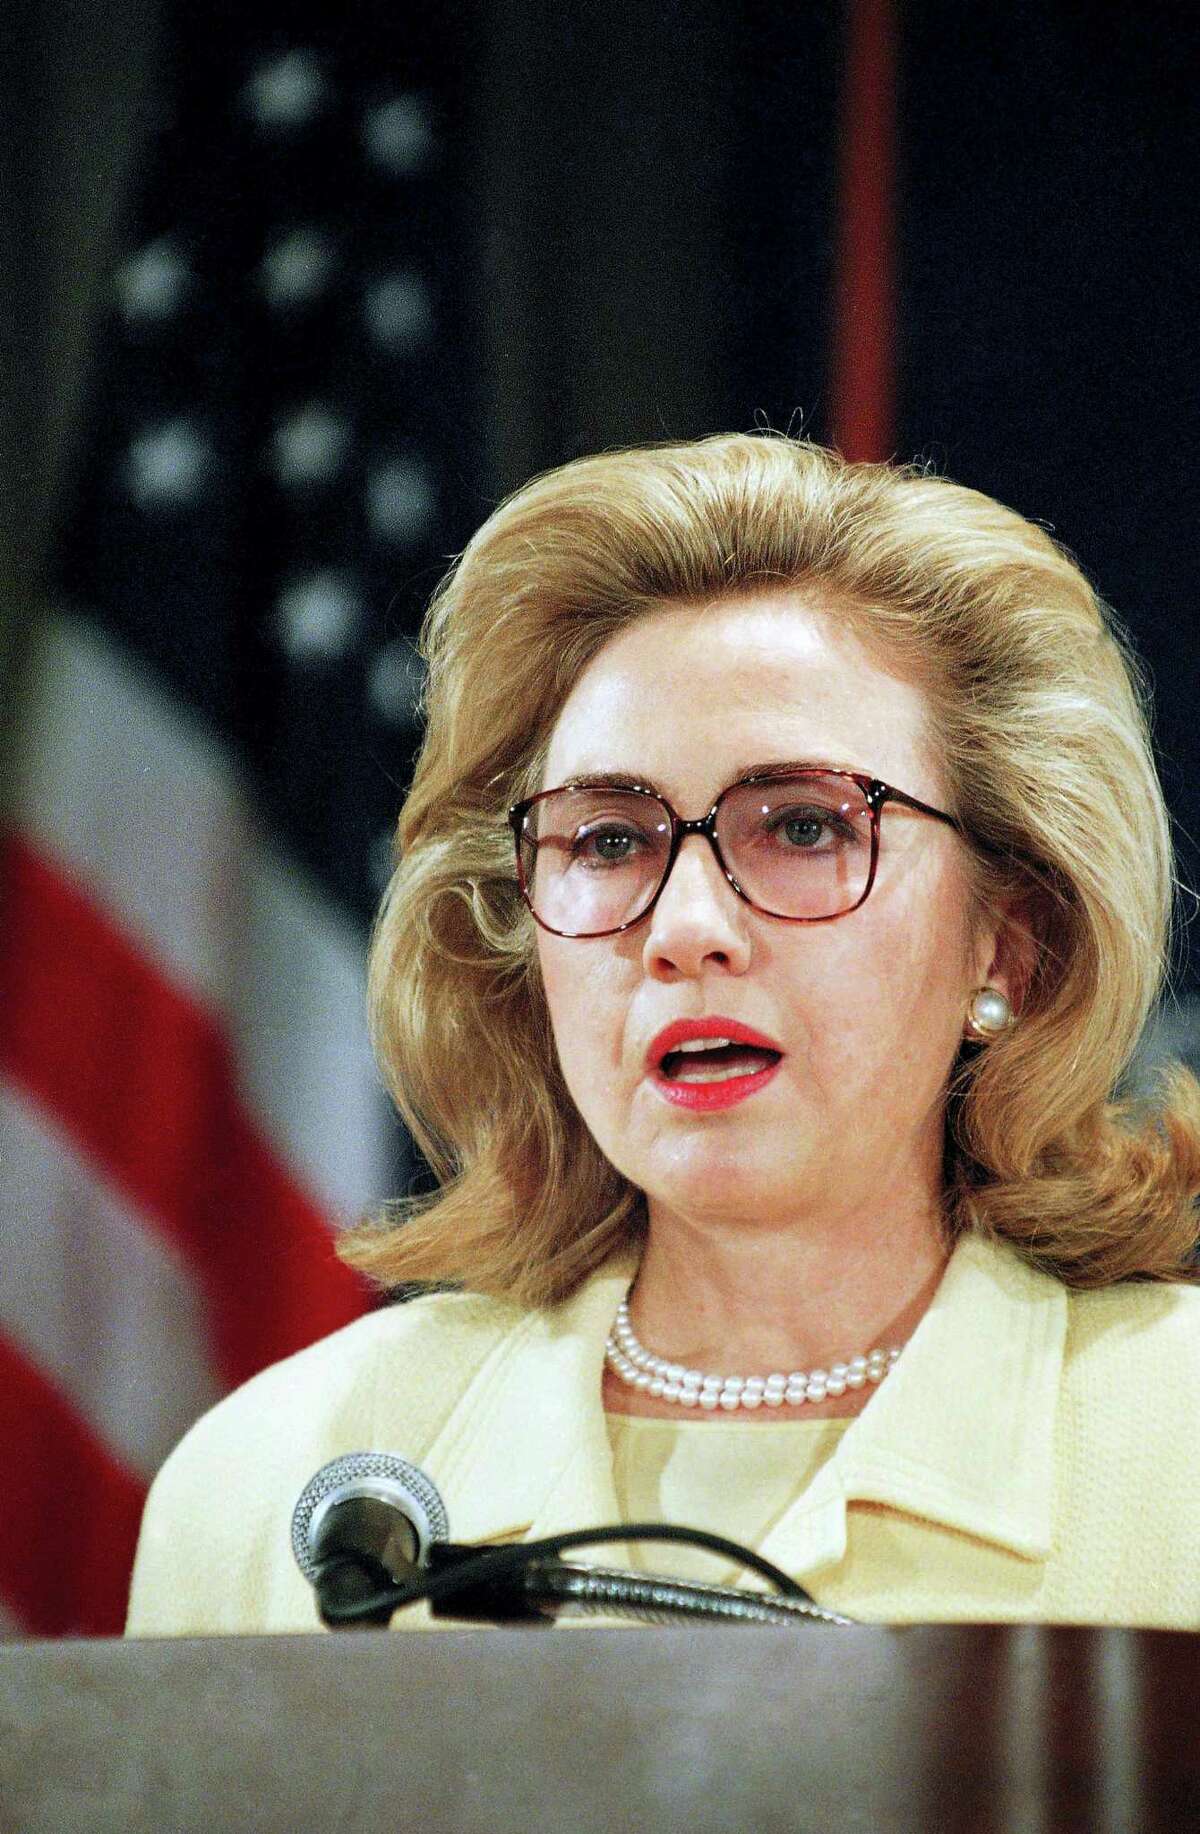 In this Aug. 14, 1995 photo, first lady Hillary Clinton addresses the Presidential Advisory Committee on Gulf War Veterans’ Illnesses in Washington. The committee was set up to provide recommendations on government activities relating to Gulf War veterans’ illnesses.